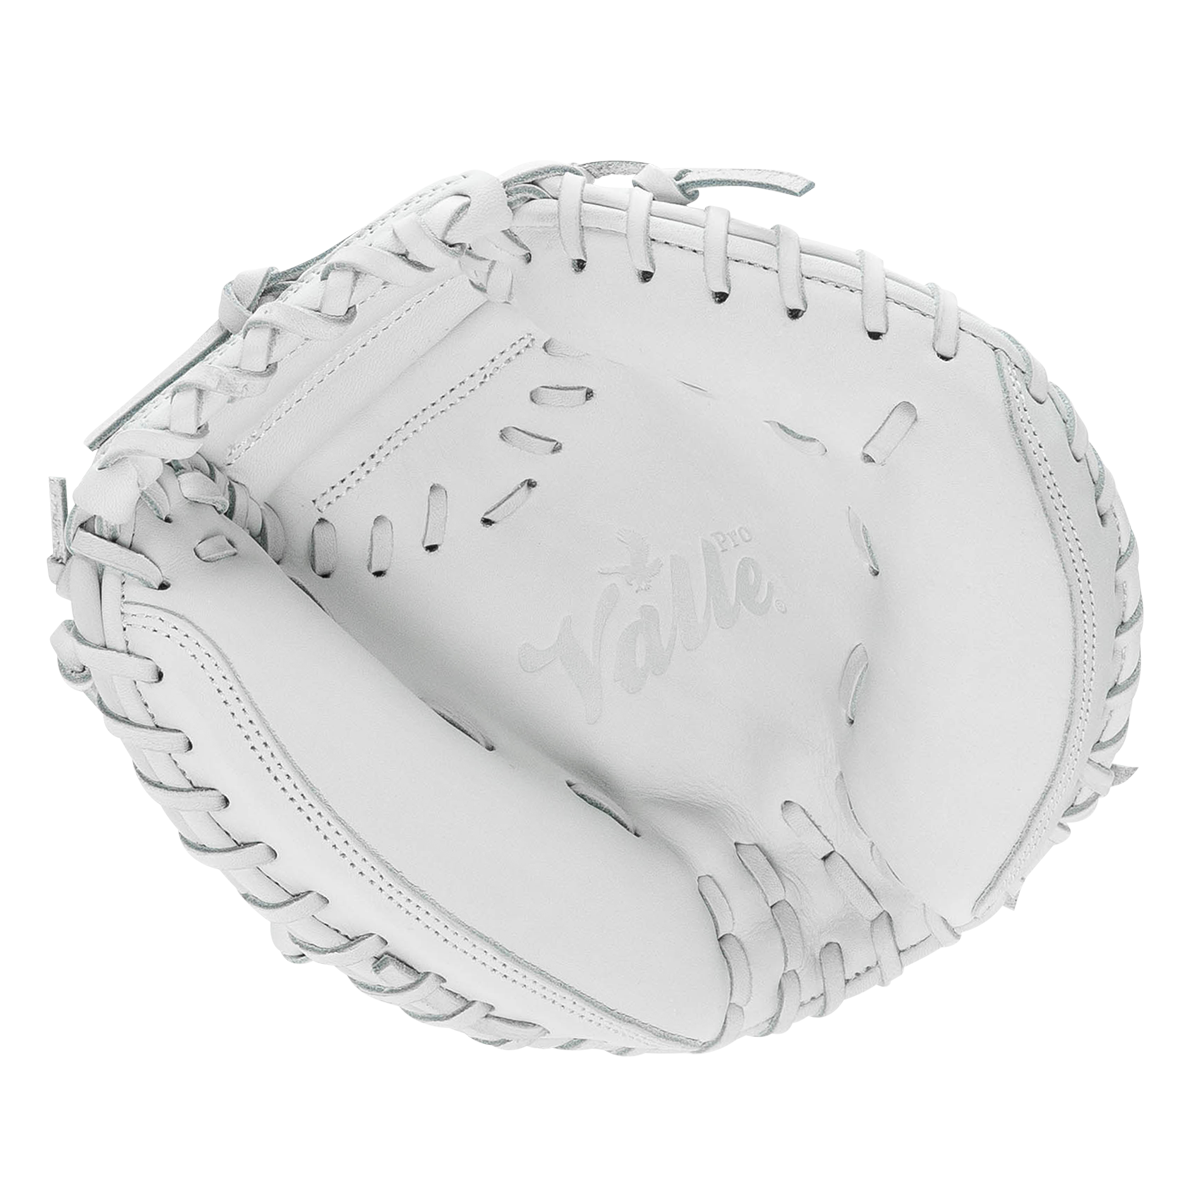 Eagle PRO 27WT Weighted Mitt